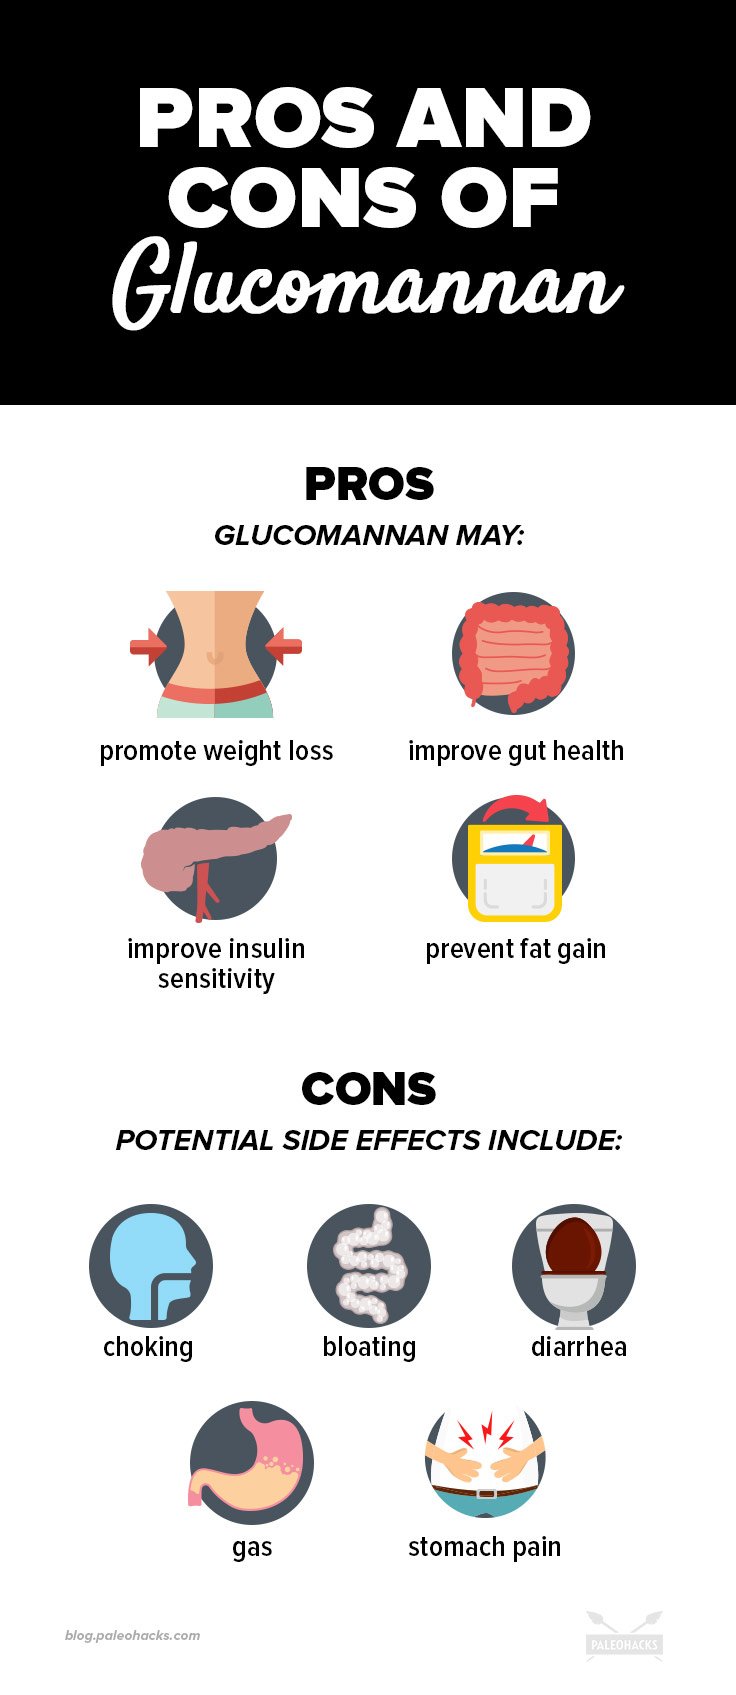 The pros and cons of Glucomannan supplements